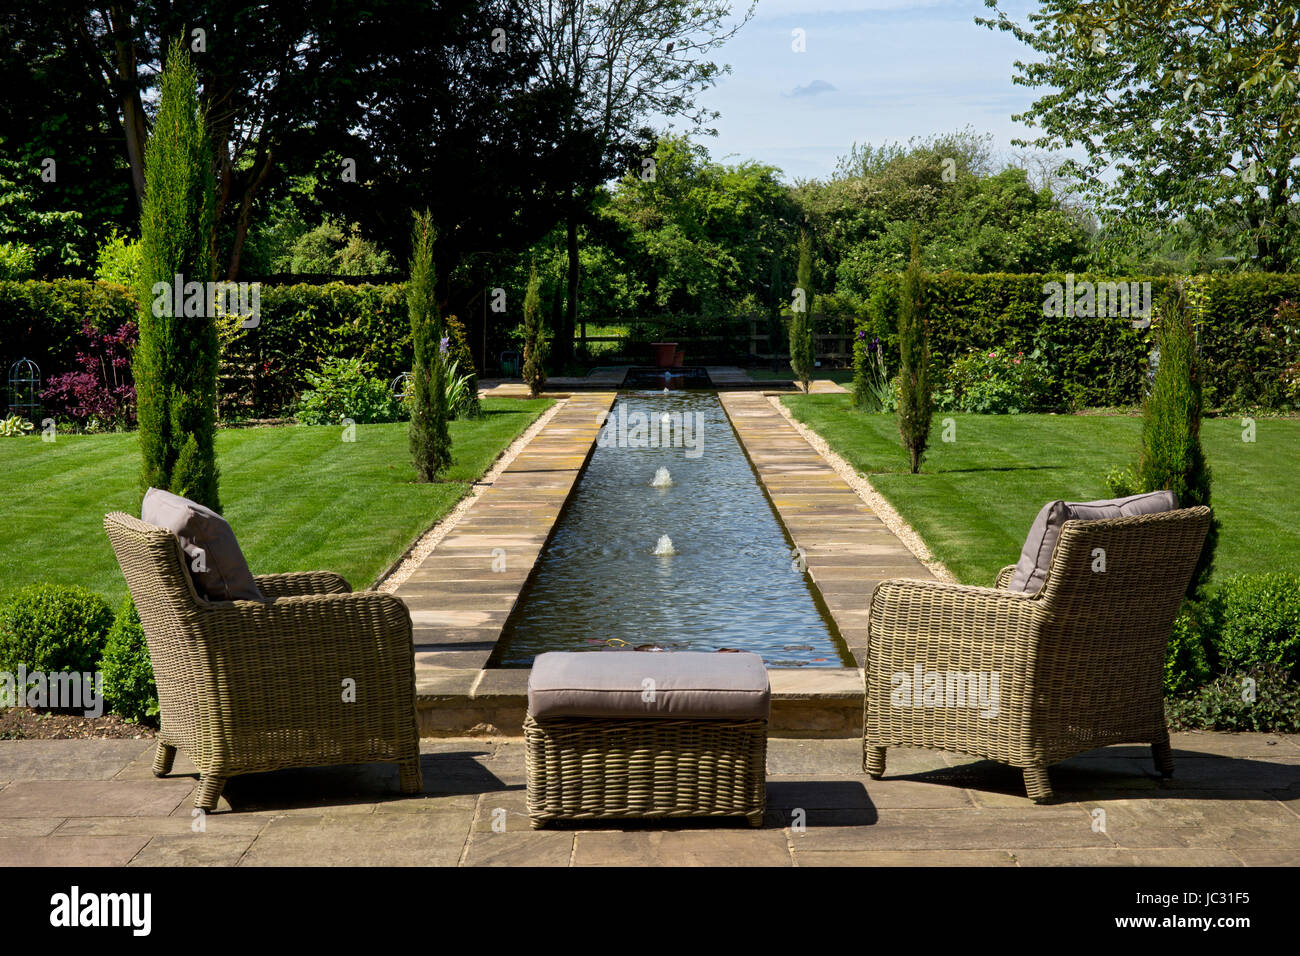 English garden with water Rill and wicker garden seating Stock Photo